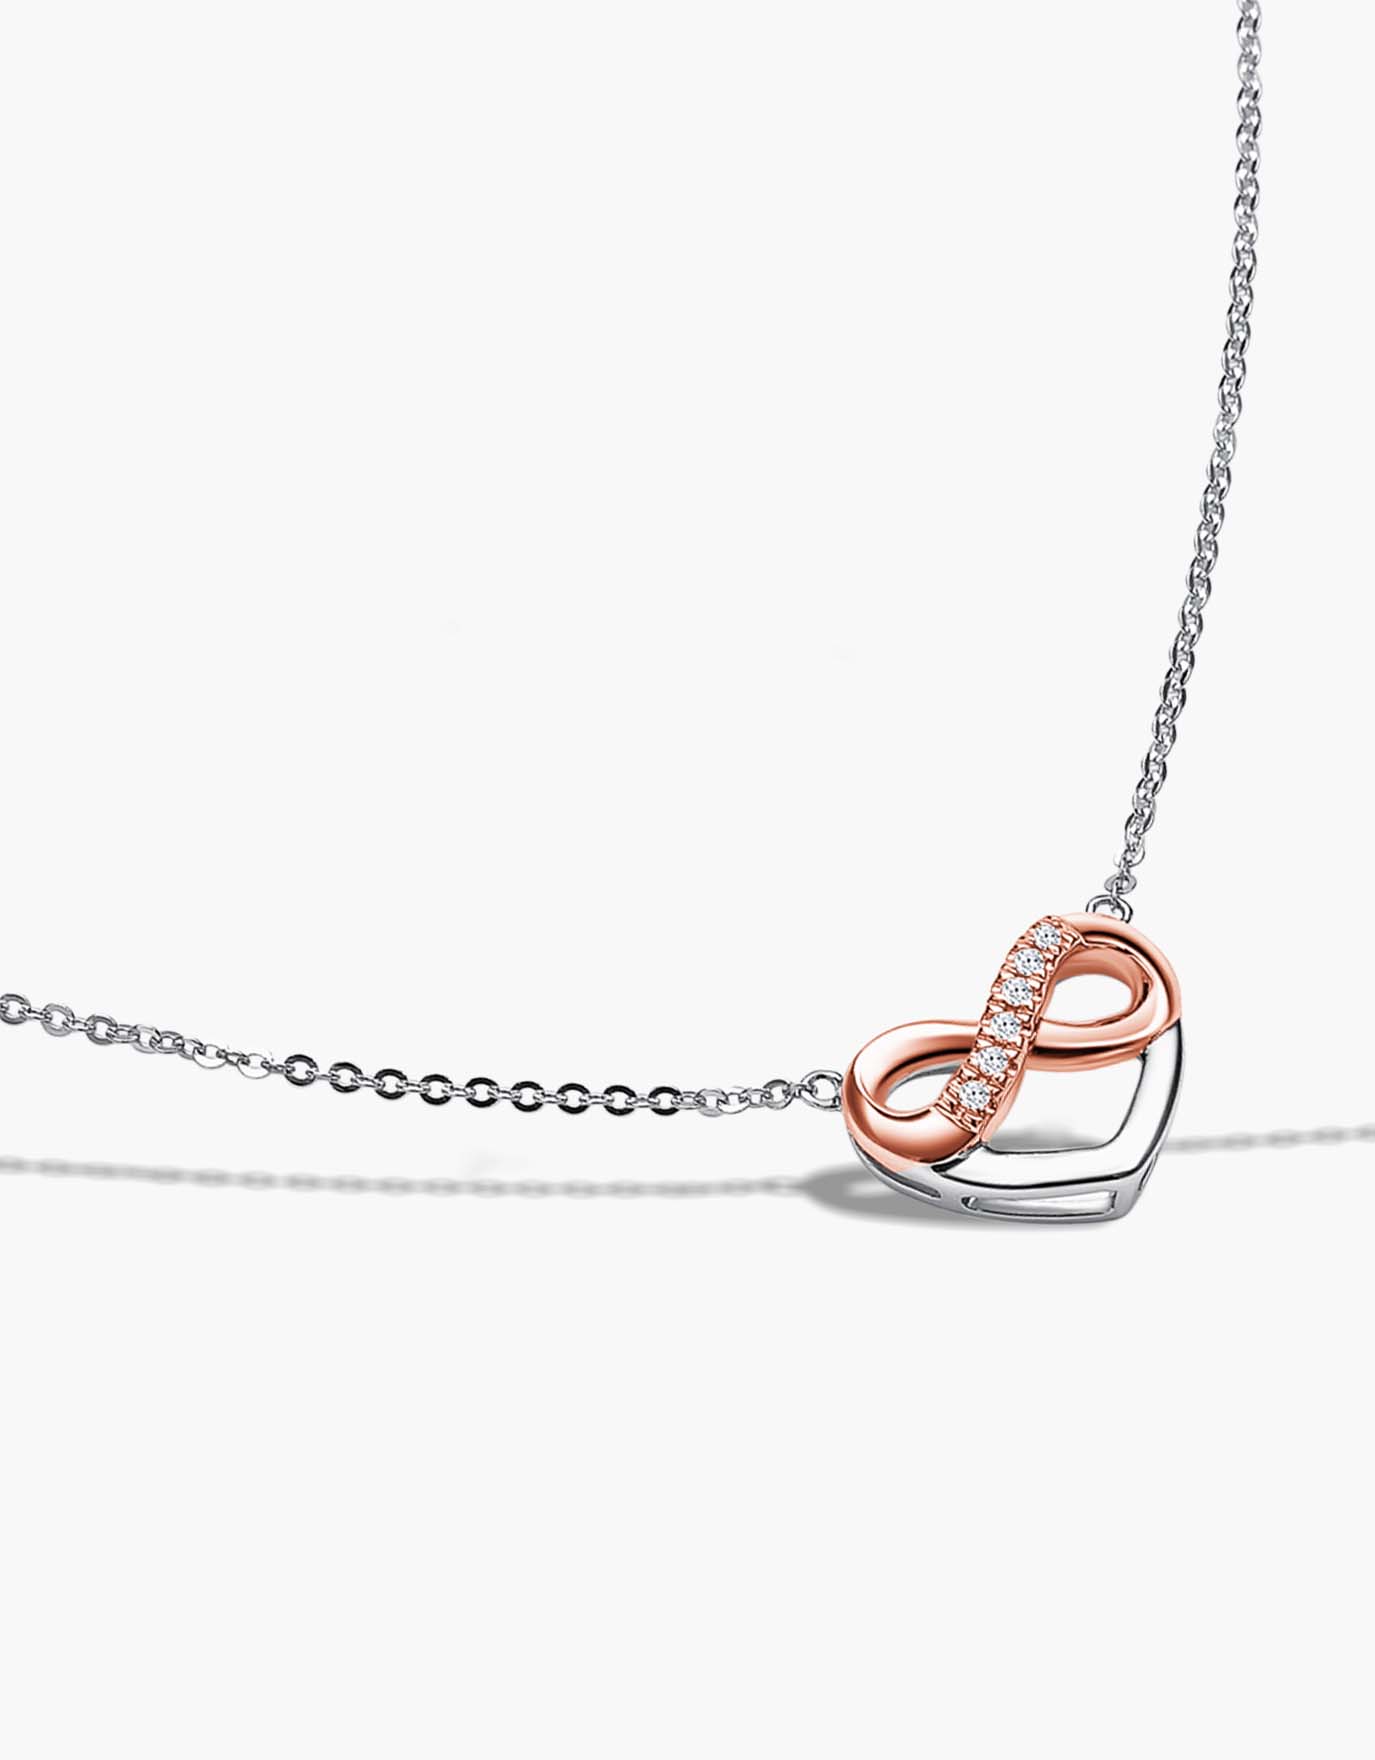 LVC Destiny Forever Love Diamond Necklace in White and Rose Gold